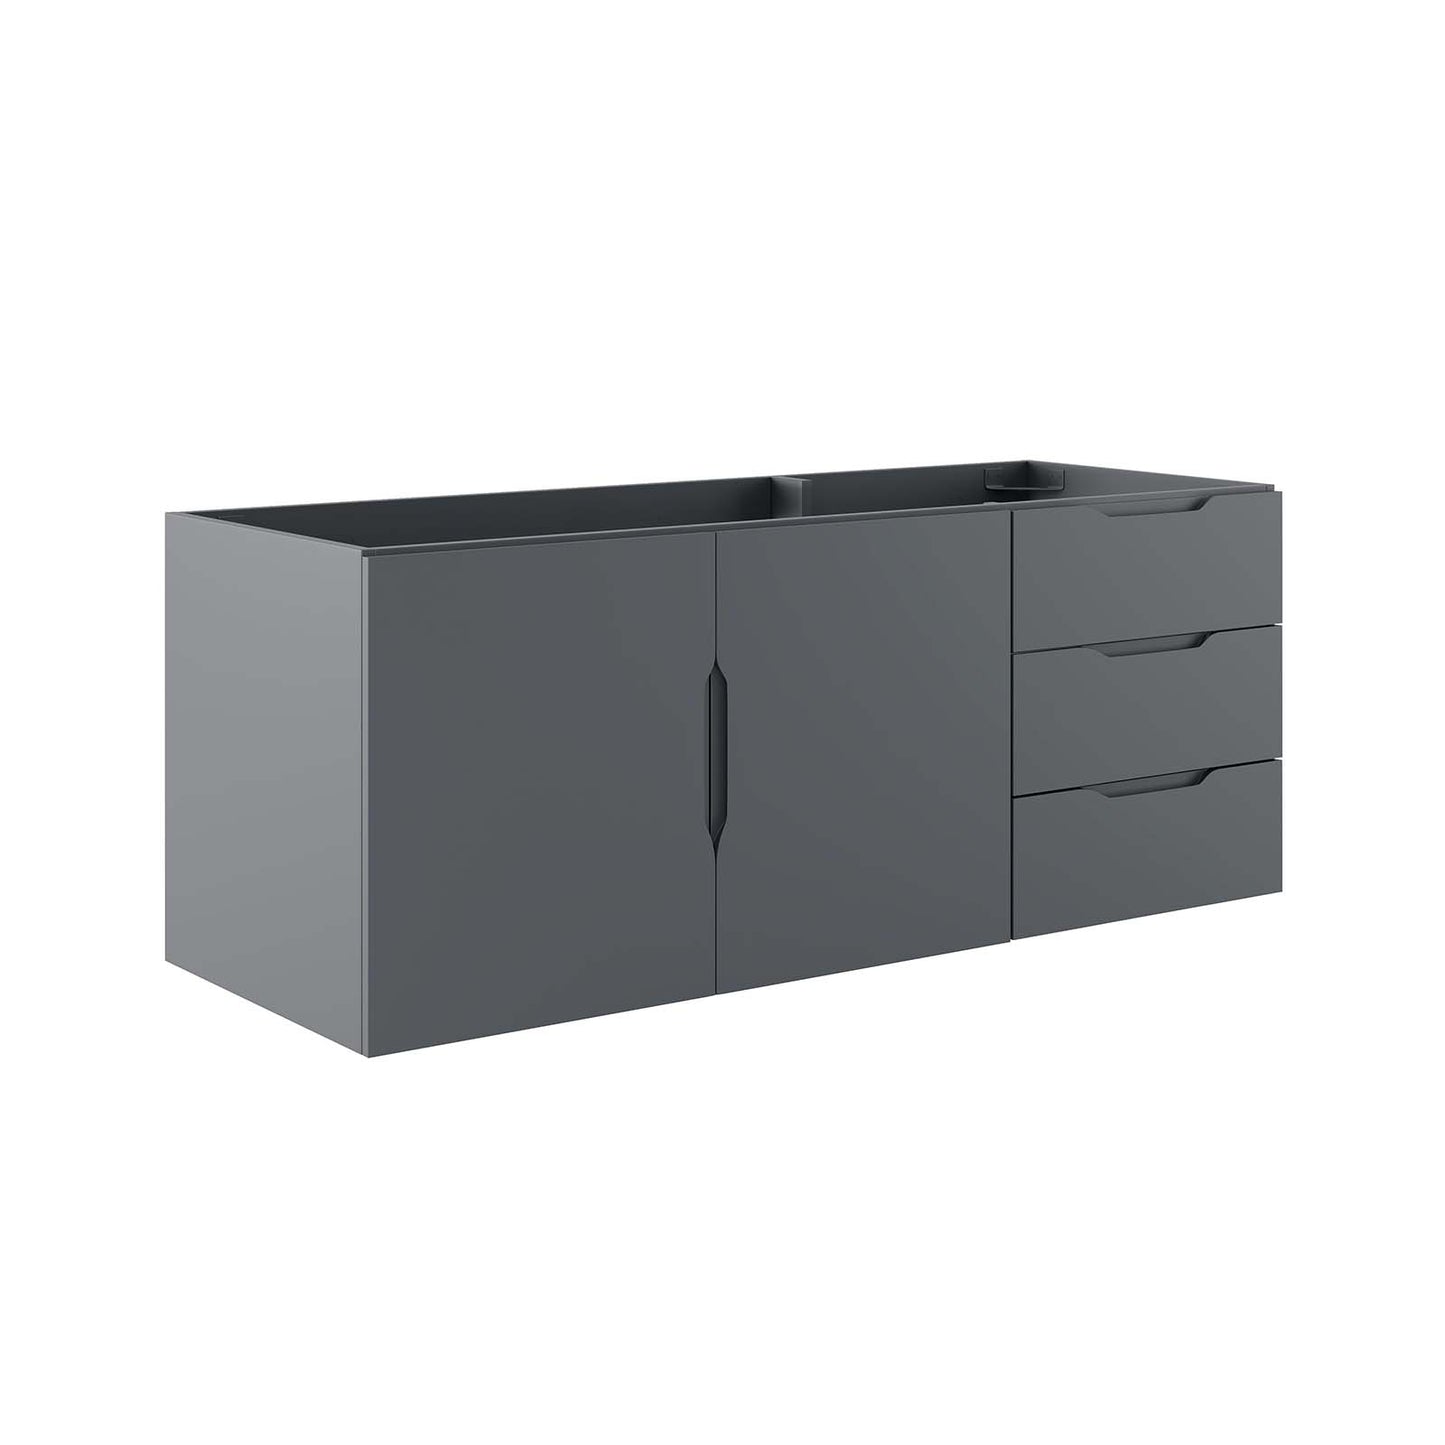 Vitality 48" Double or Single Sink Compatible (Not Included) Bathroom Vanity Cabinet Gray EEI-4895-GRY